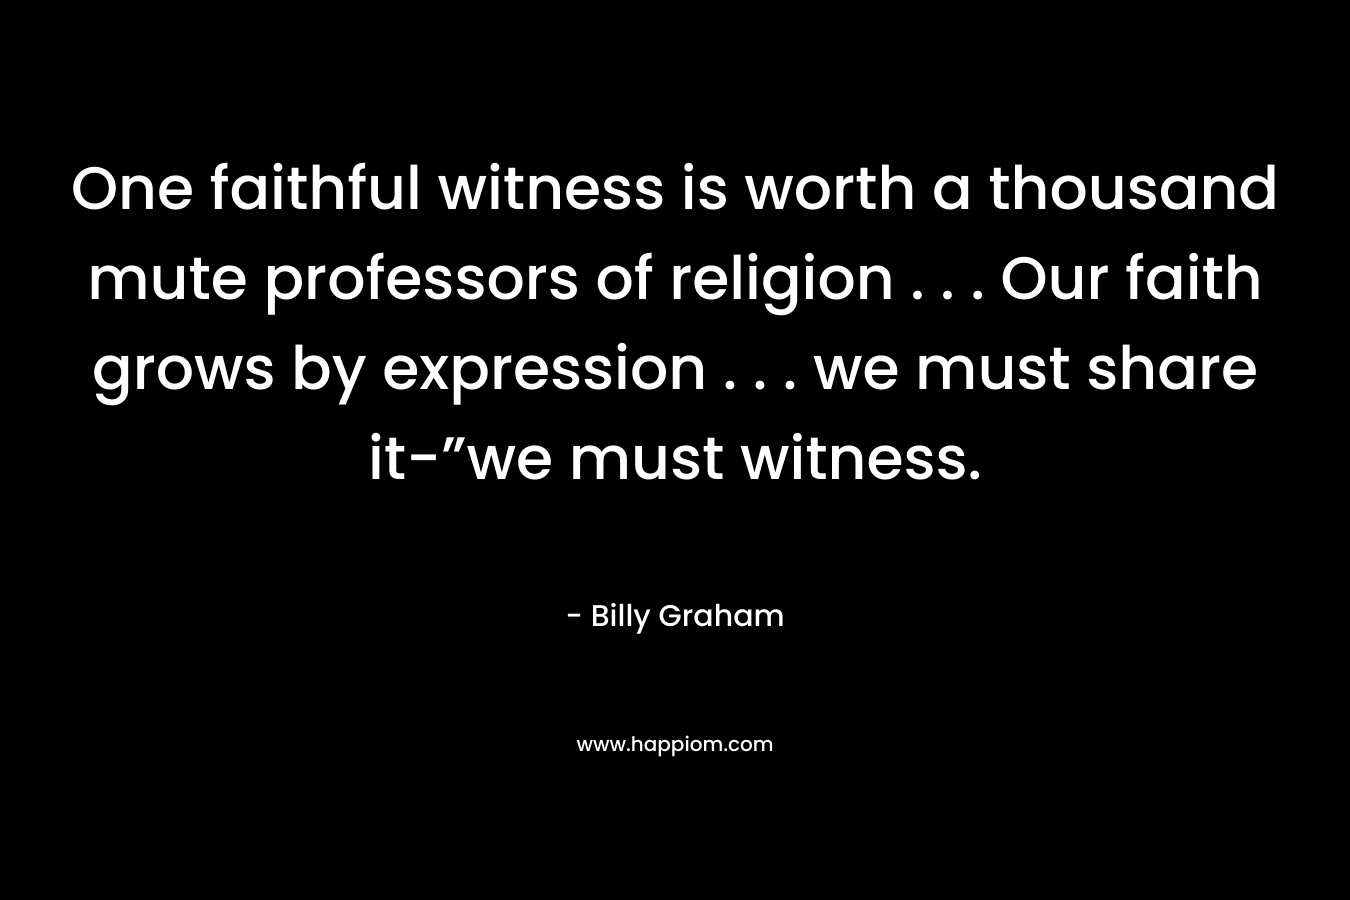 One faithful witness is worth a thousand mute professors of religion . . . Our faith grows by expression . . . we must share it-”we must witness.